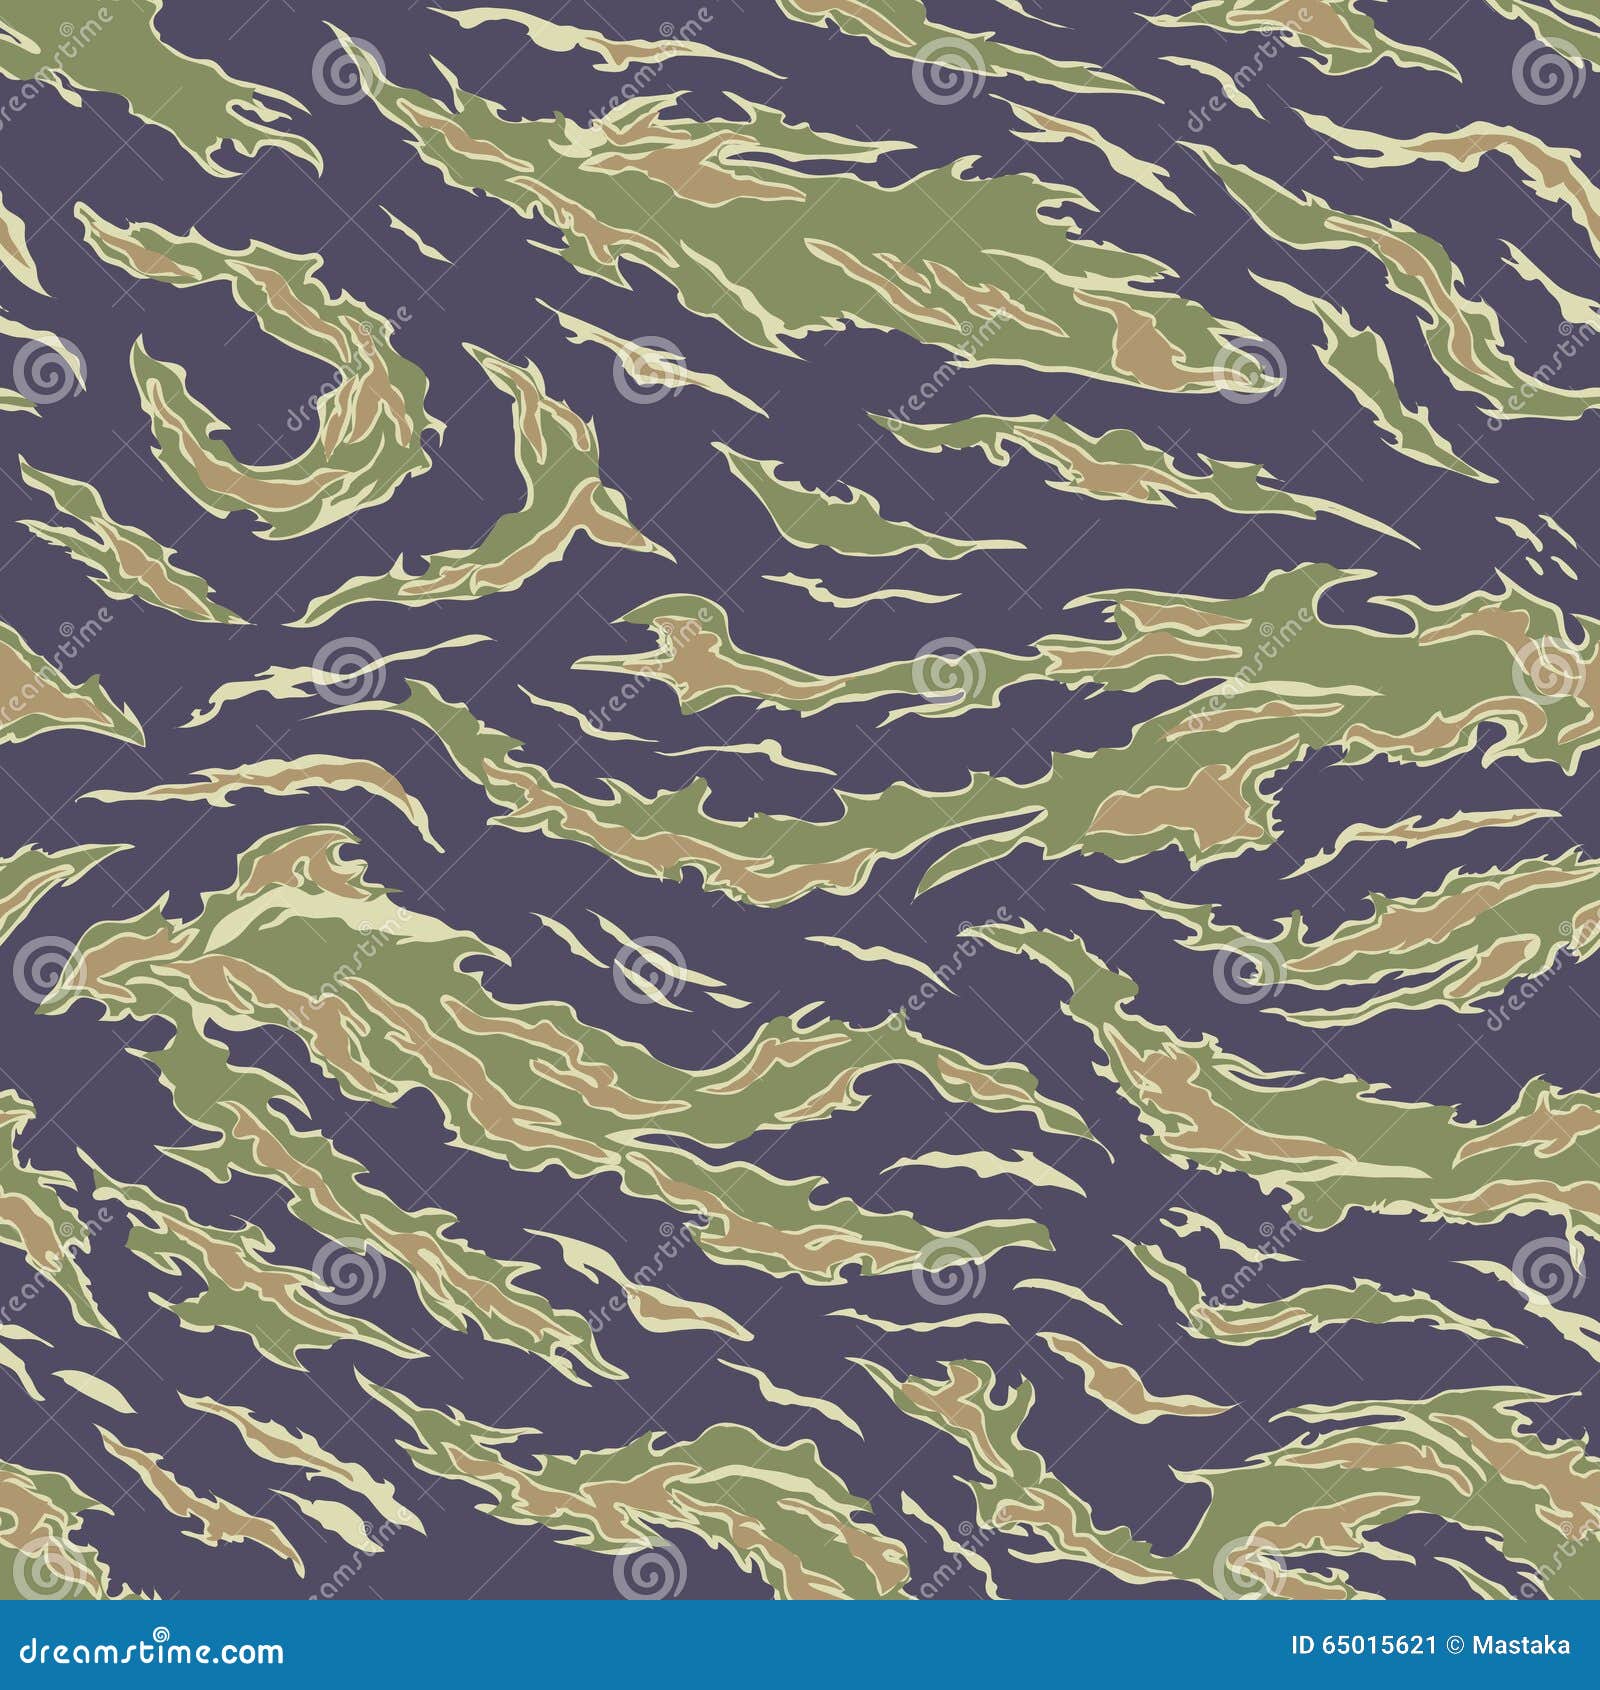 military camouflage textile pattern